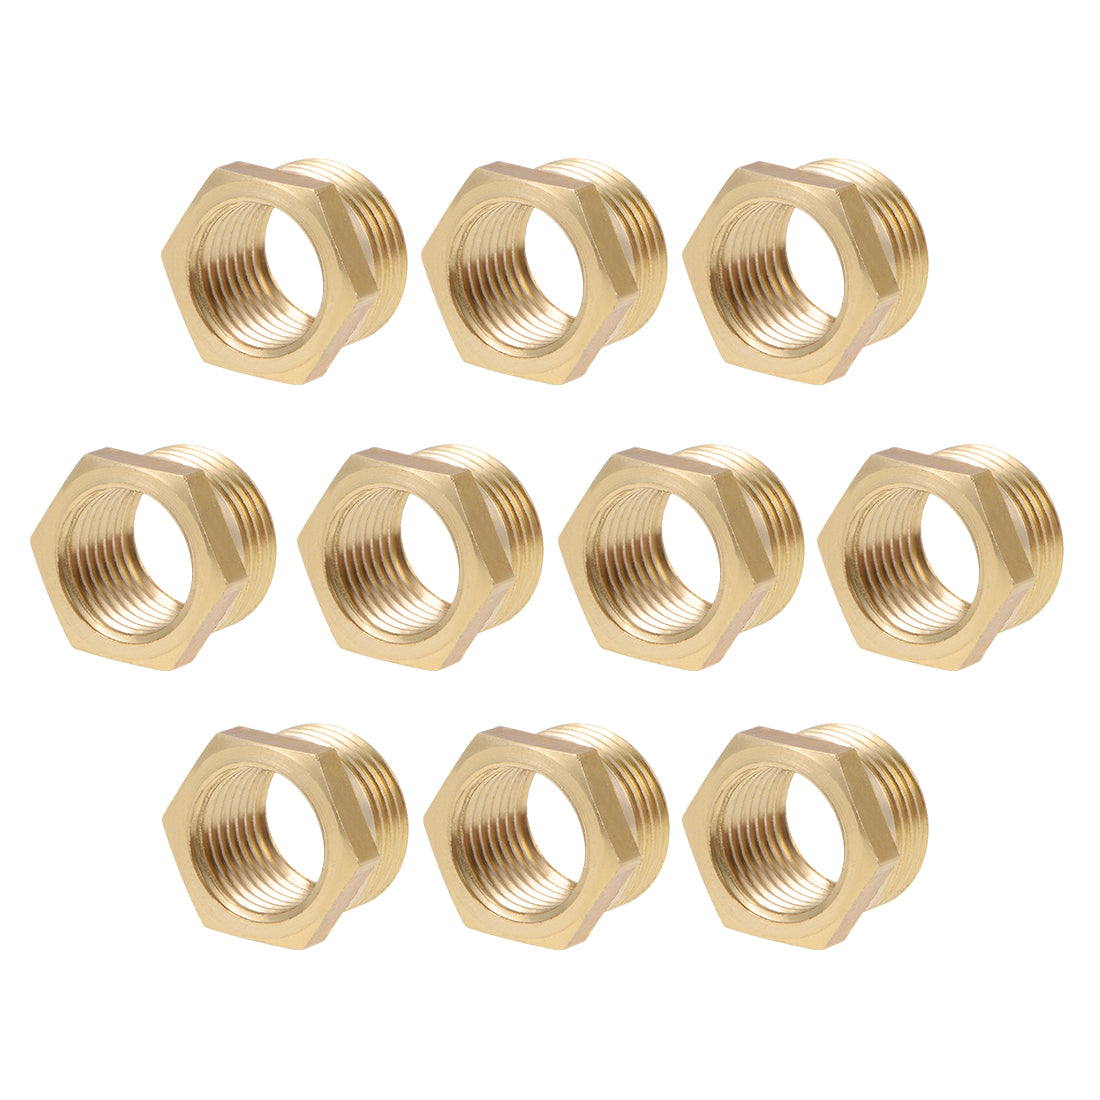 uxcell Uxcell Brass Threaded Pipe Fitting G3/8 Male x G1/4 Female Hex Bushing Adapter 10pcs